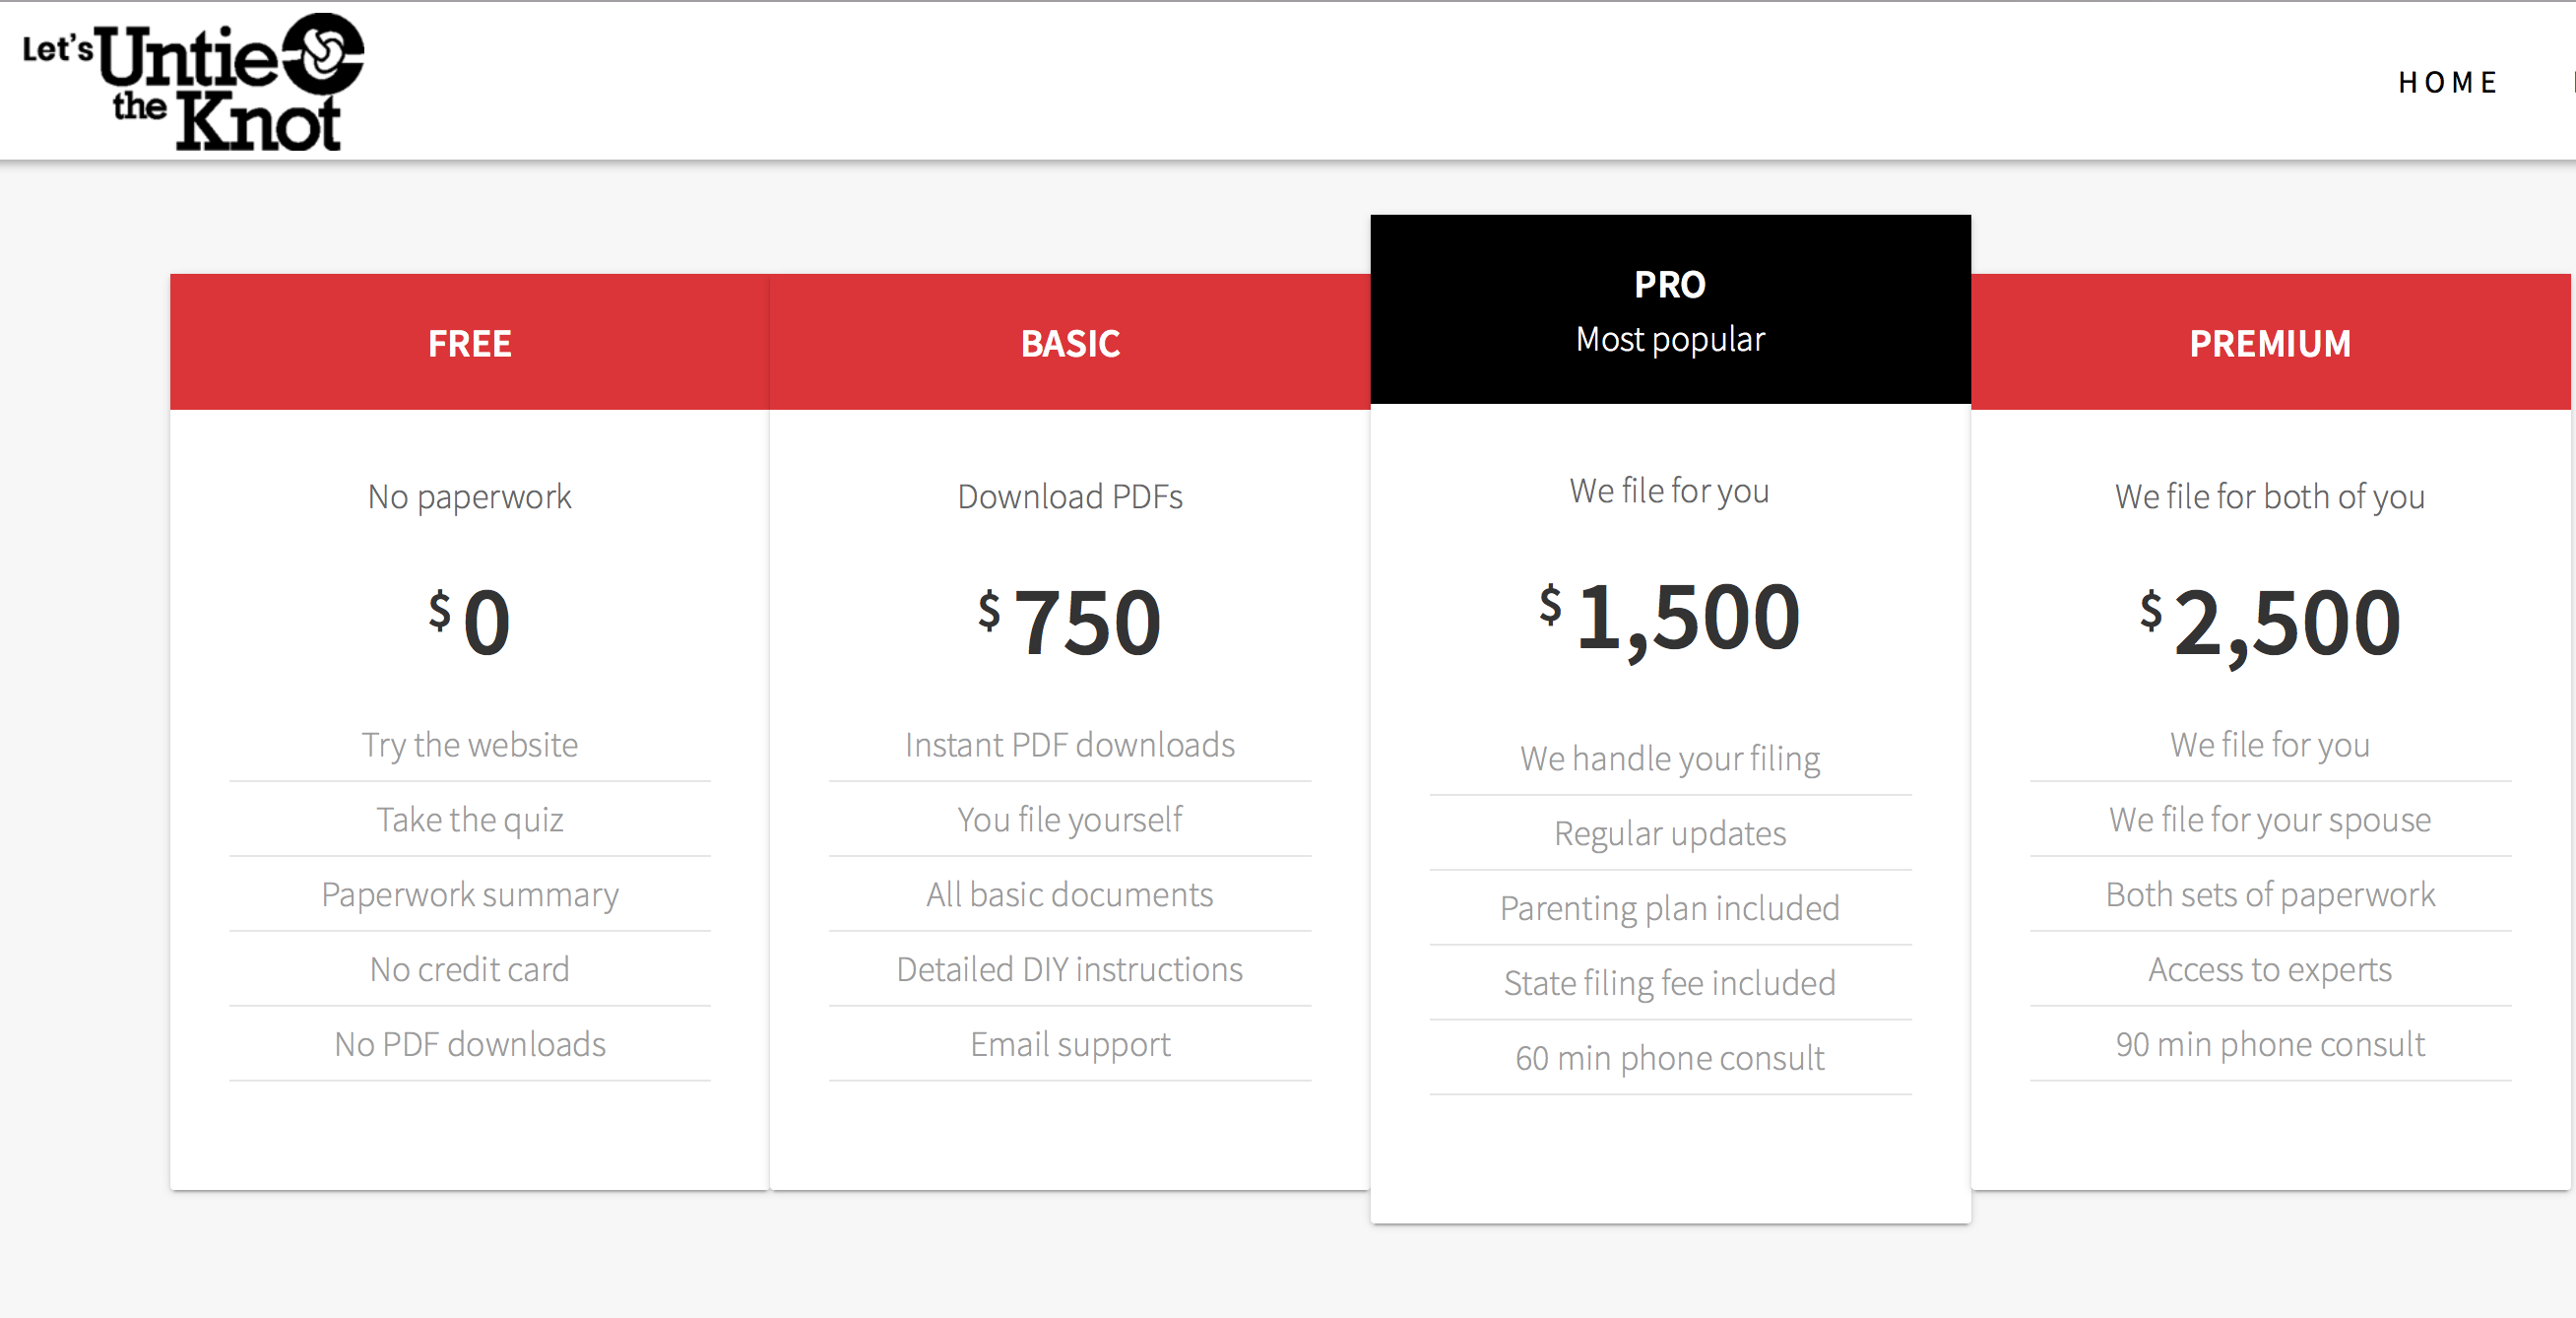 The site offers four packages: Free ($0), Basic ($750), Pro ($1,500) and Premium ($2,500).